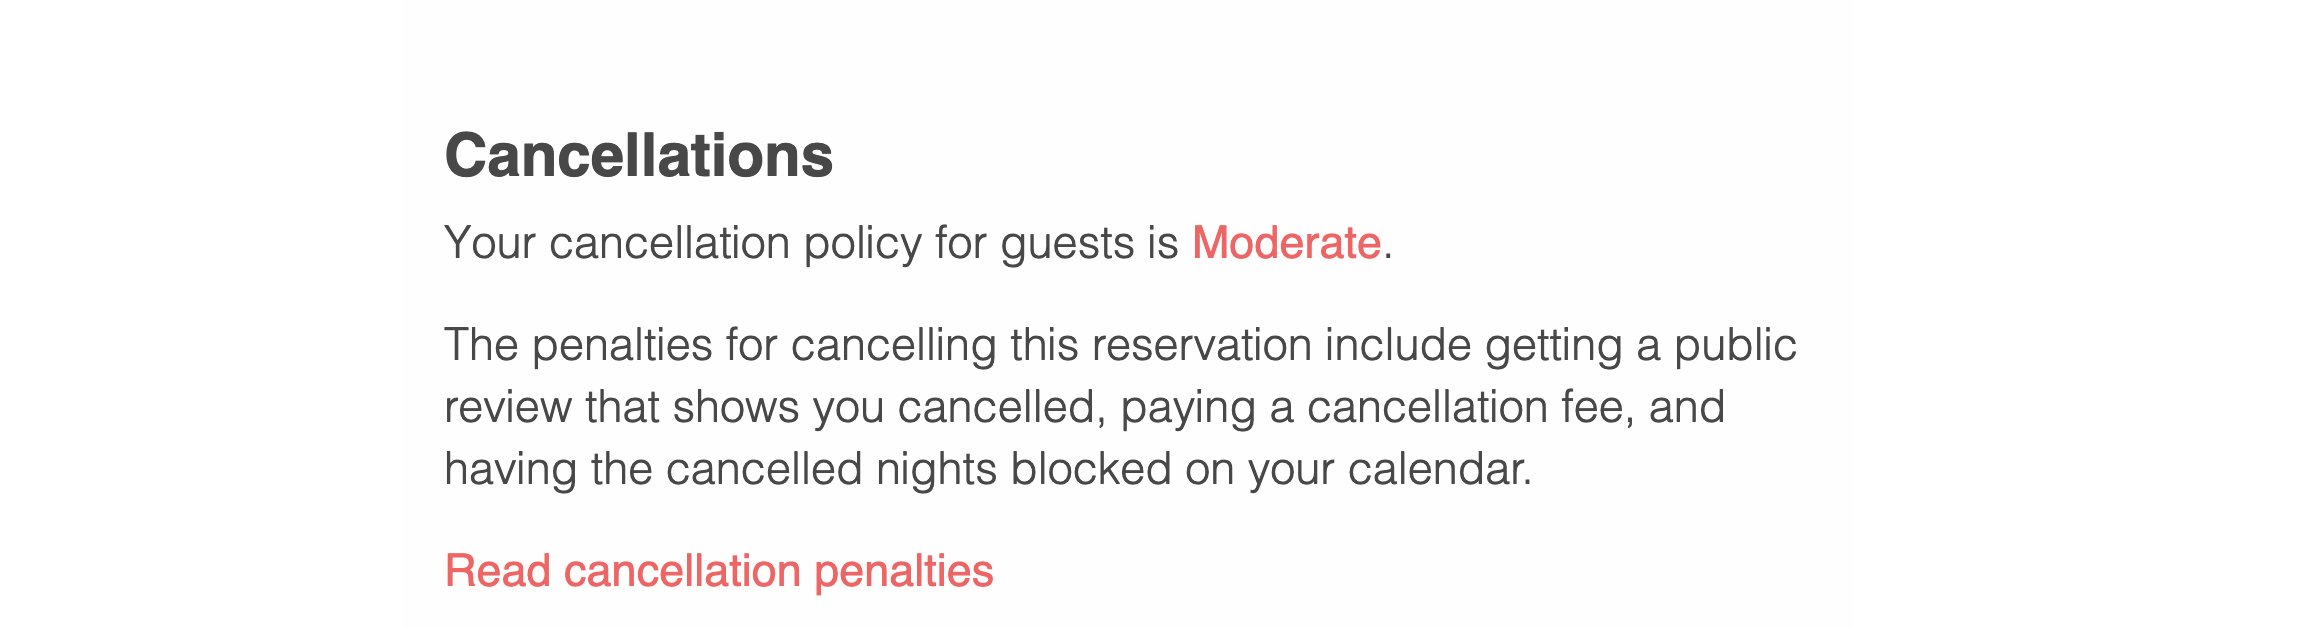 o.a.t. travel cancellation policy